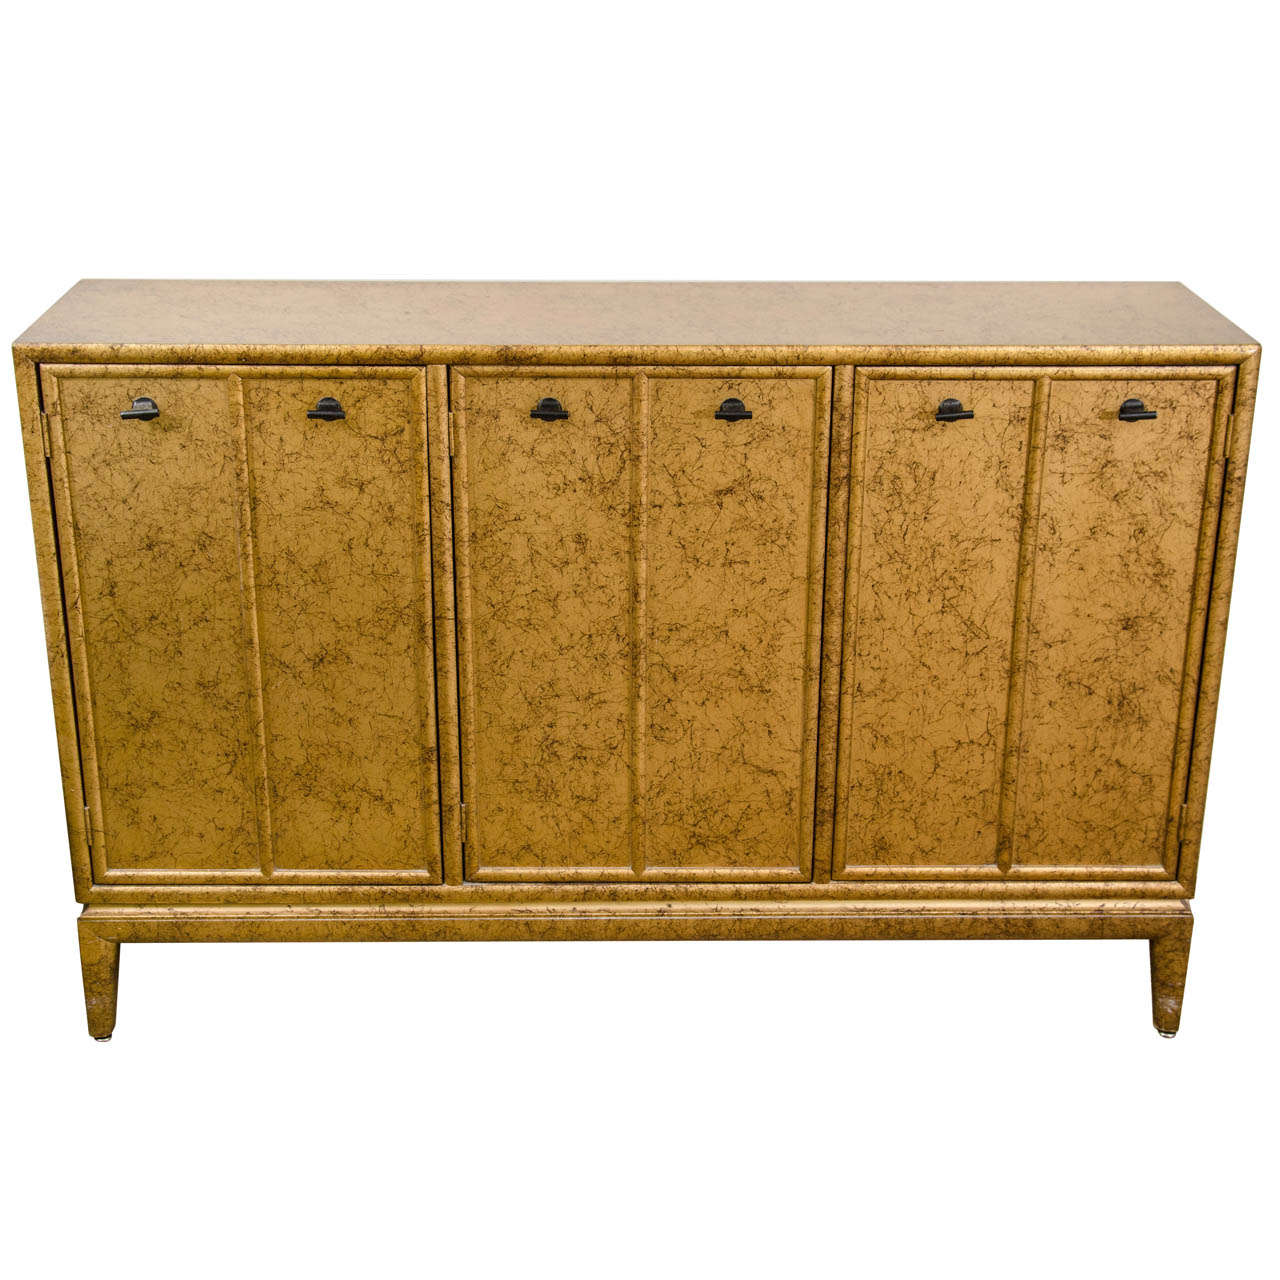 A Baker Style Credenza